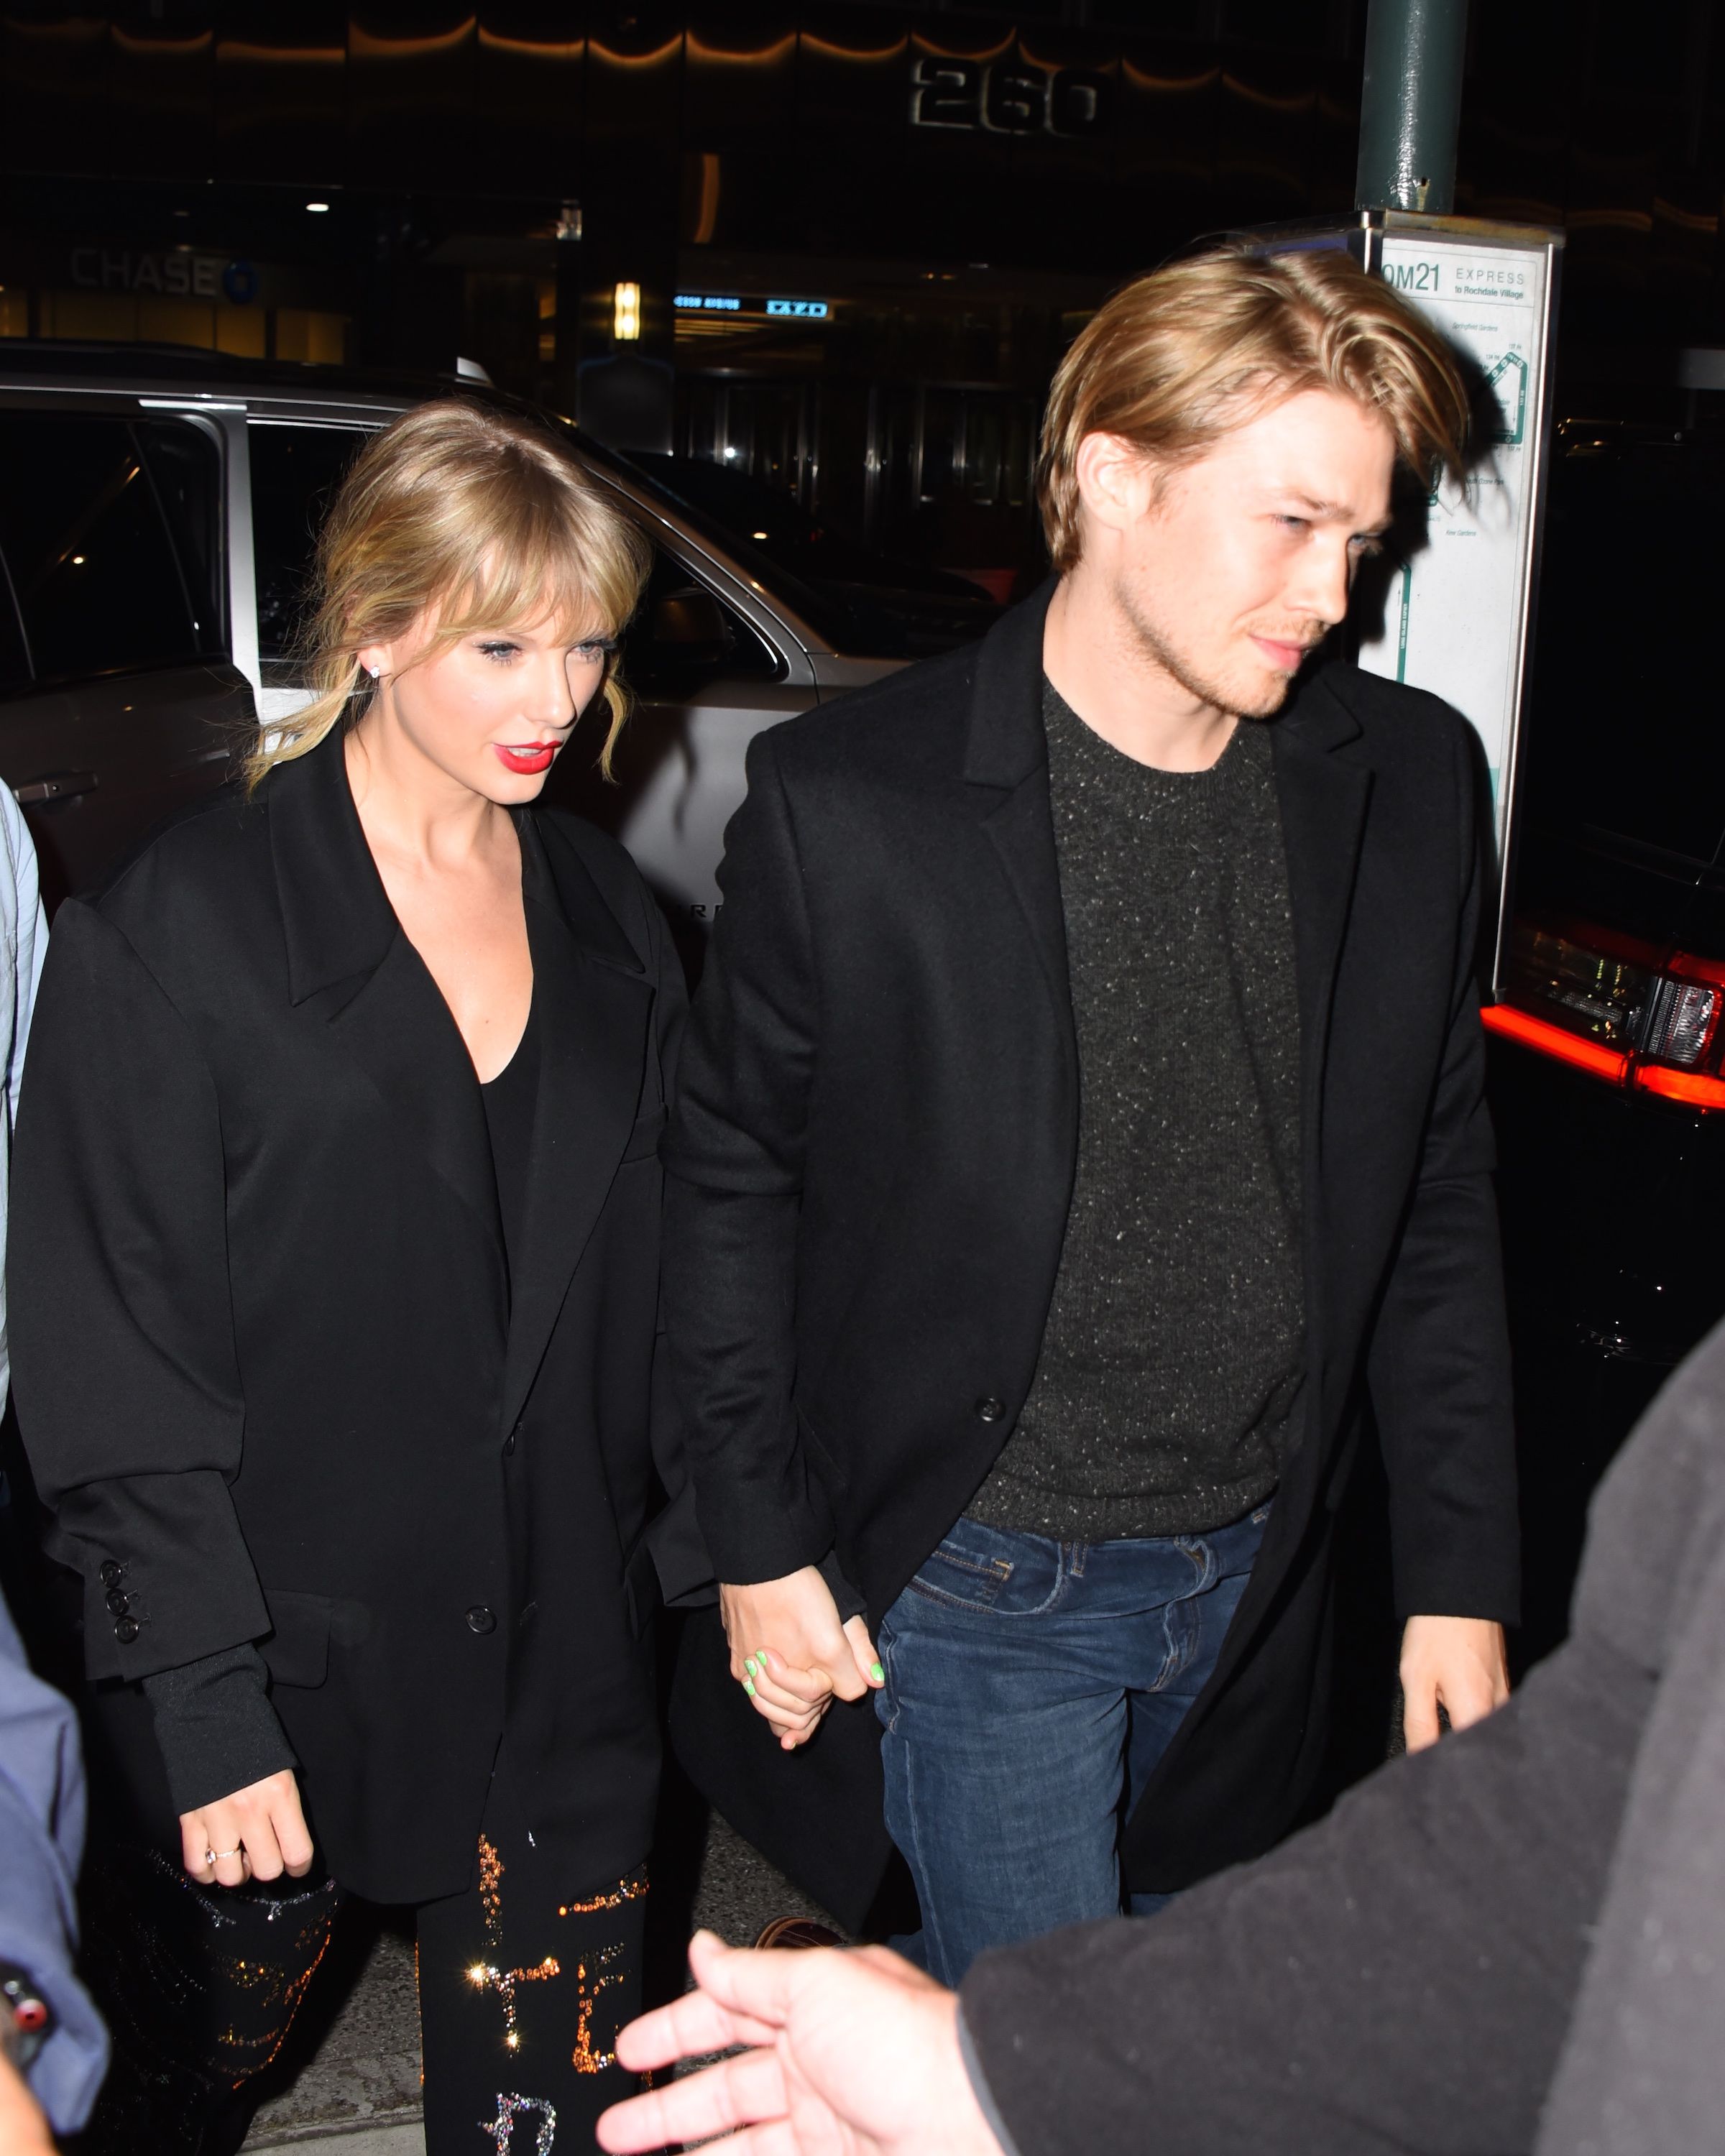 Taylor Swift and Joe Alwyn: All We Know About Their Breakup